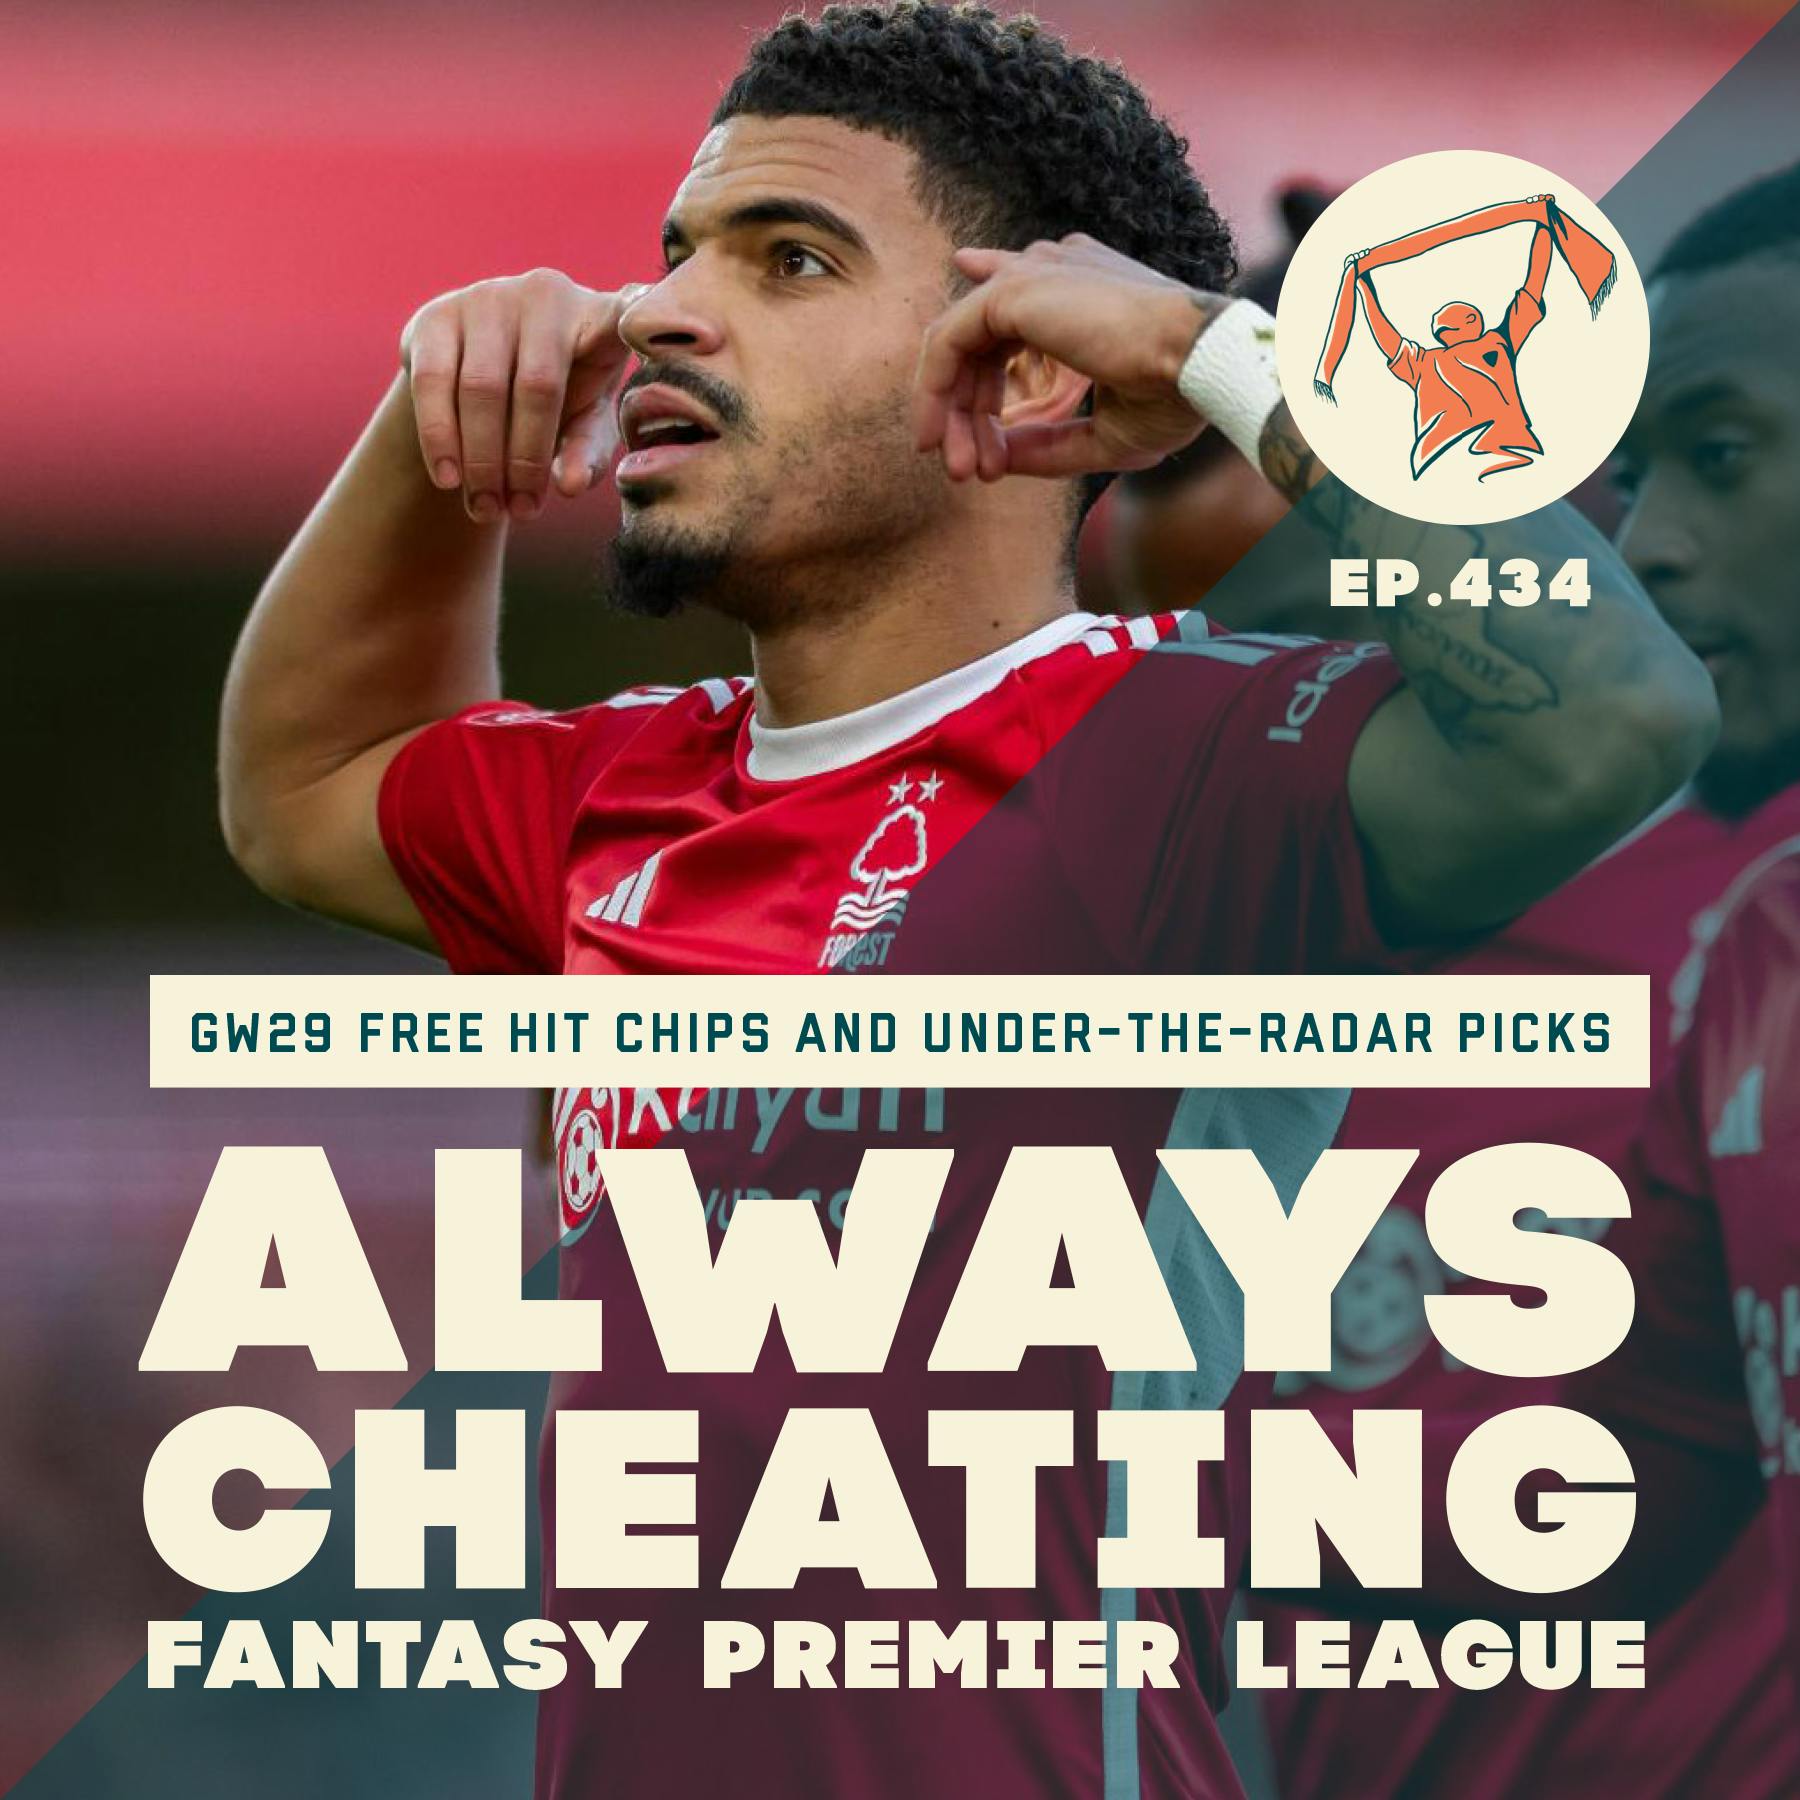 GW29 Preview: Free Hits, Transfer Ideas, and Under-the-Radar Picks